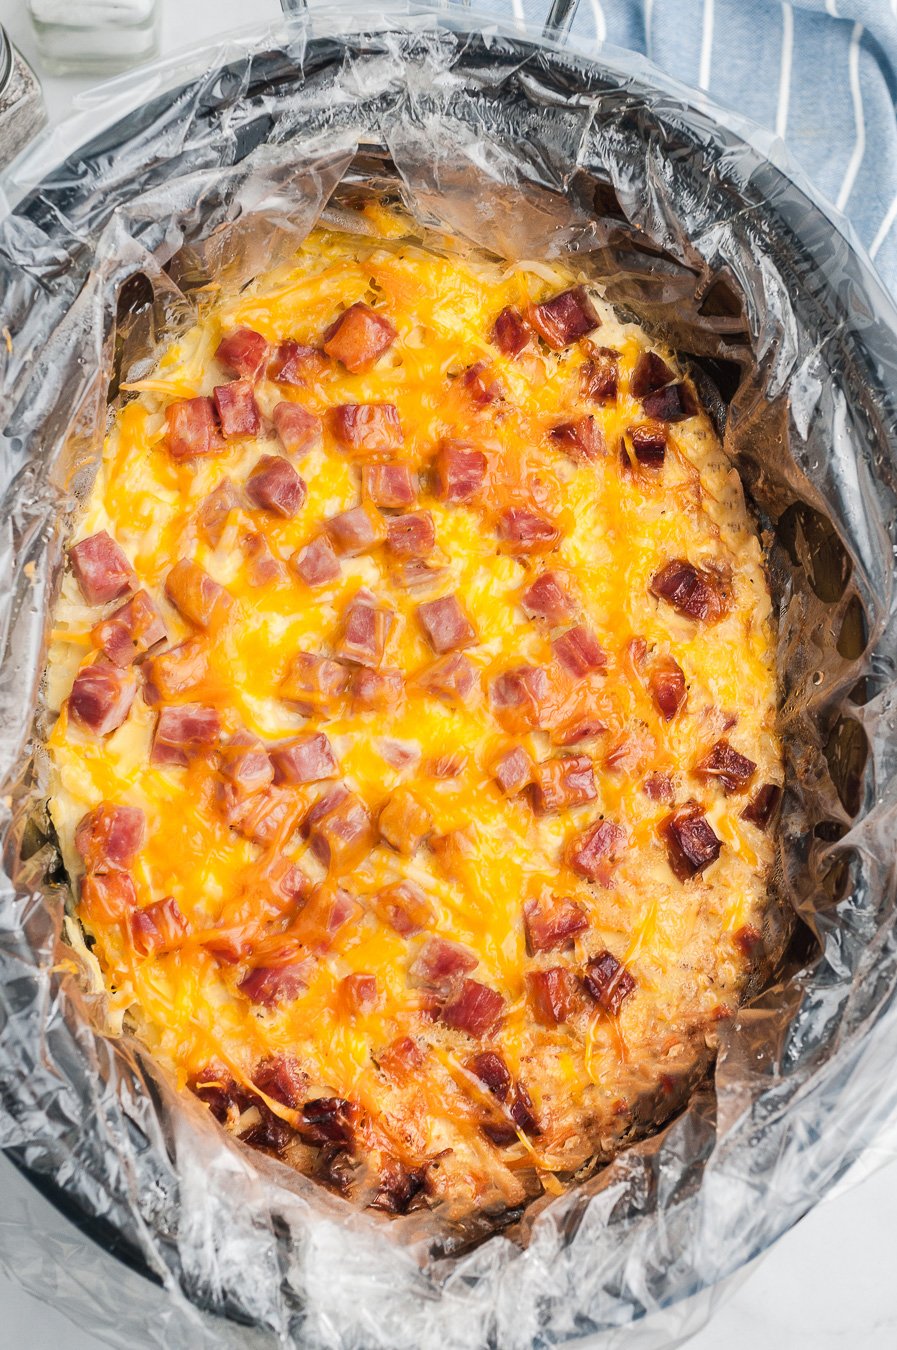 inside view of slow cooker with prepared breakfast casserole inside with chunks of cooked ham and melted cheddar cheese.